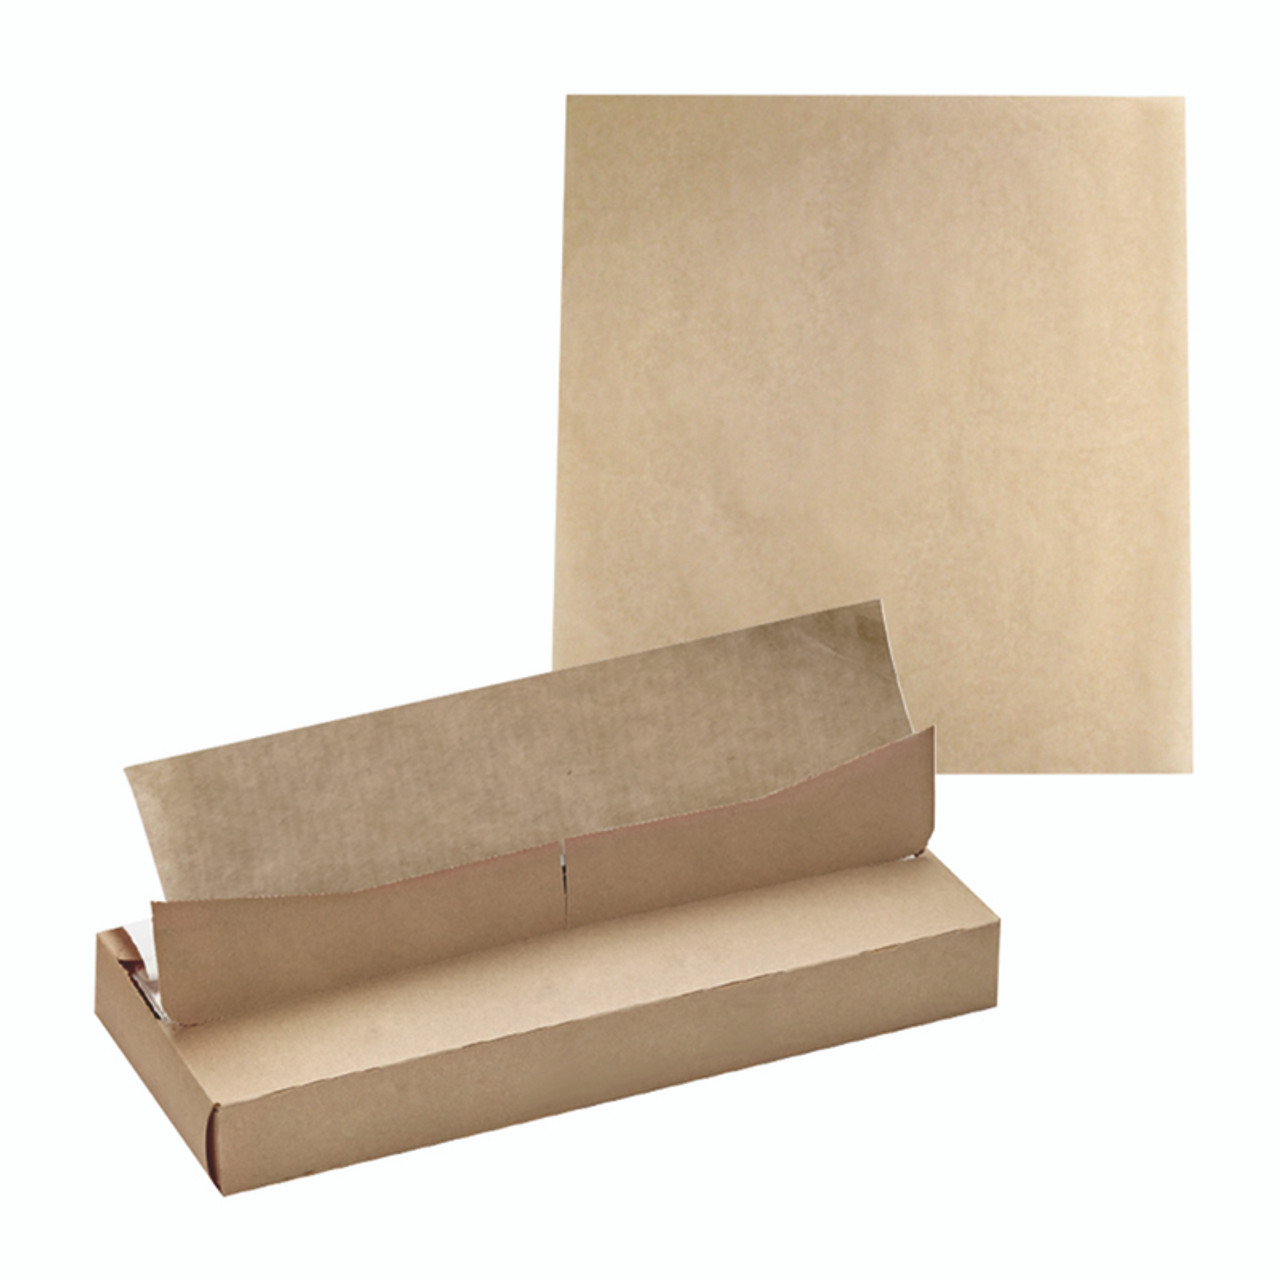 Greaseproof Brown Sheets In Dispenser Box - L:13.75 x W:10.6in